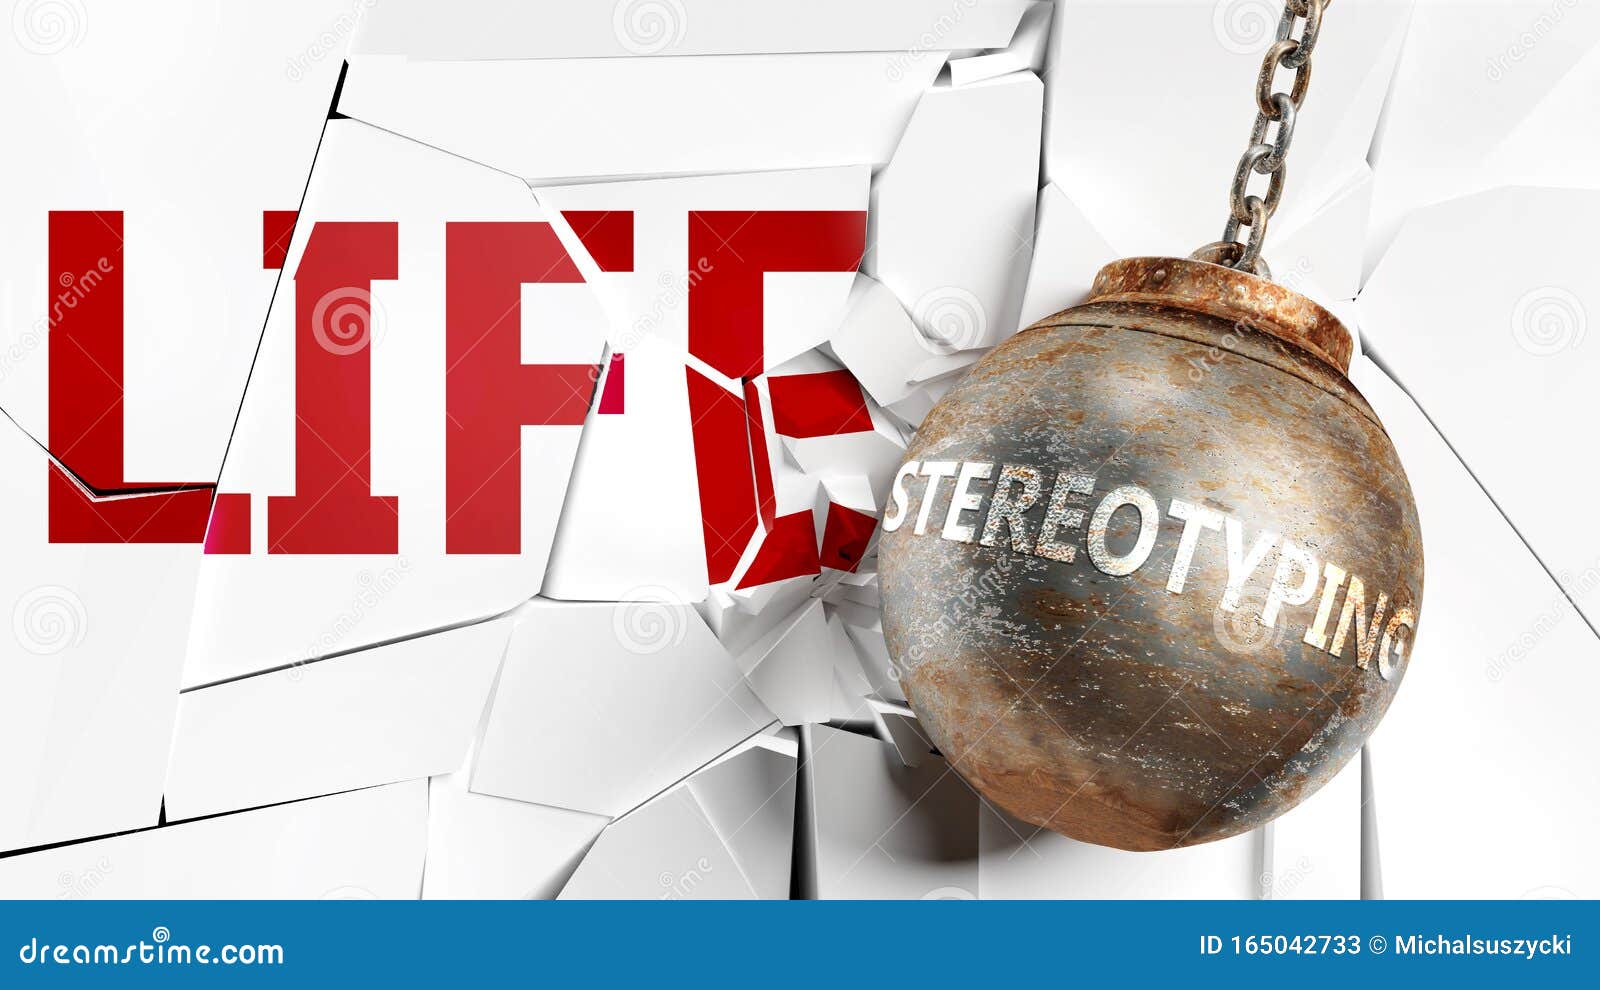 stereotyping and life - pictured as a word stereotyping and a wreck ball to ize that stereotyping can have bad effect and